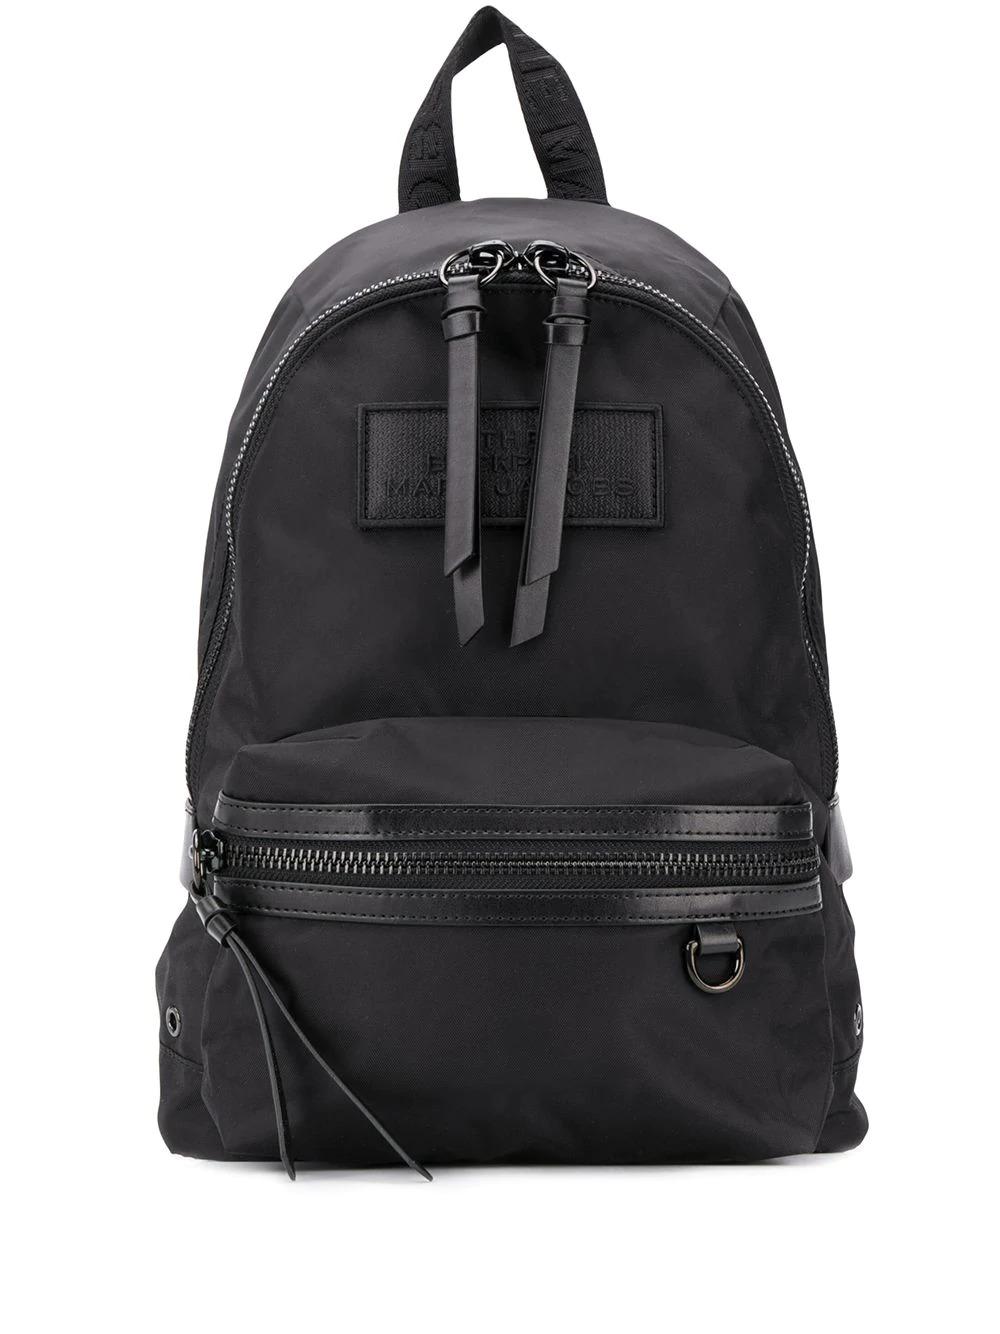 Marc Jacobs Synthetic Backpack in Black - Lyst